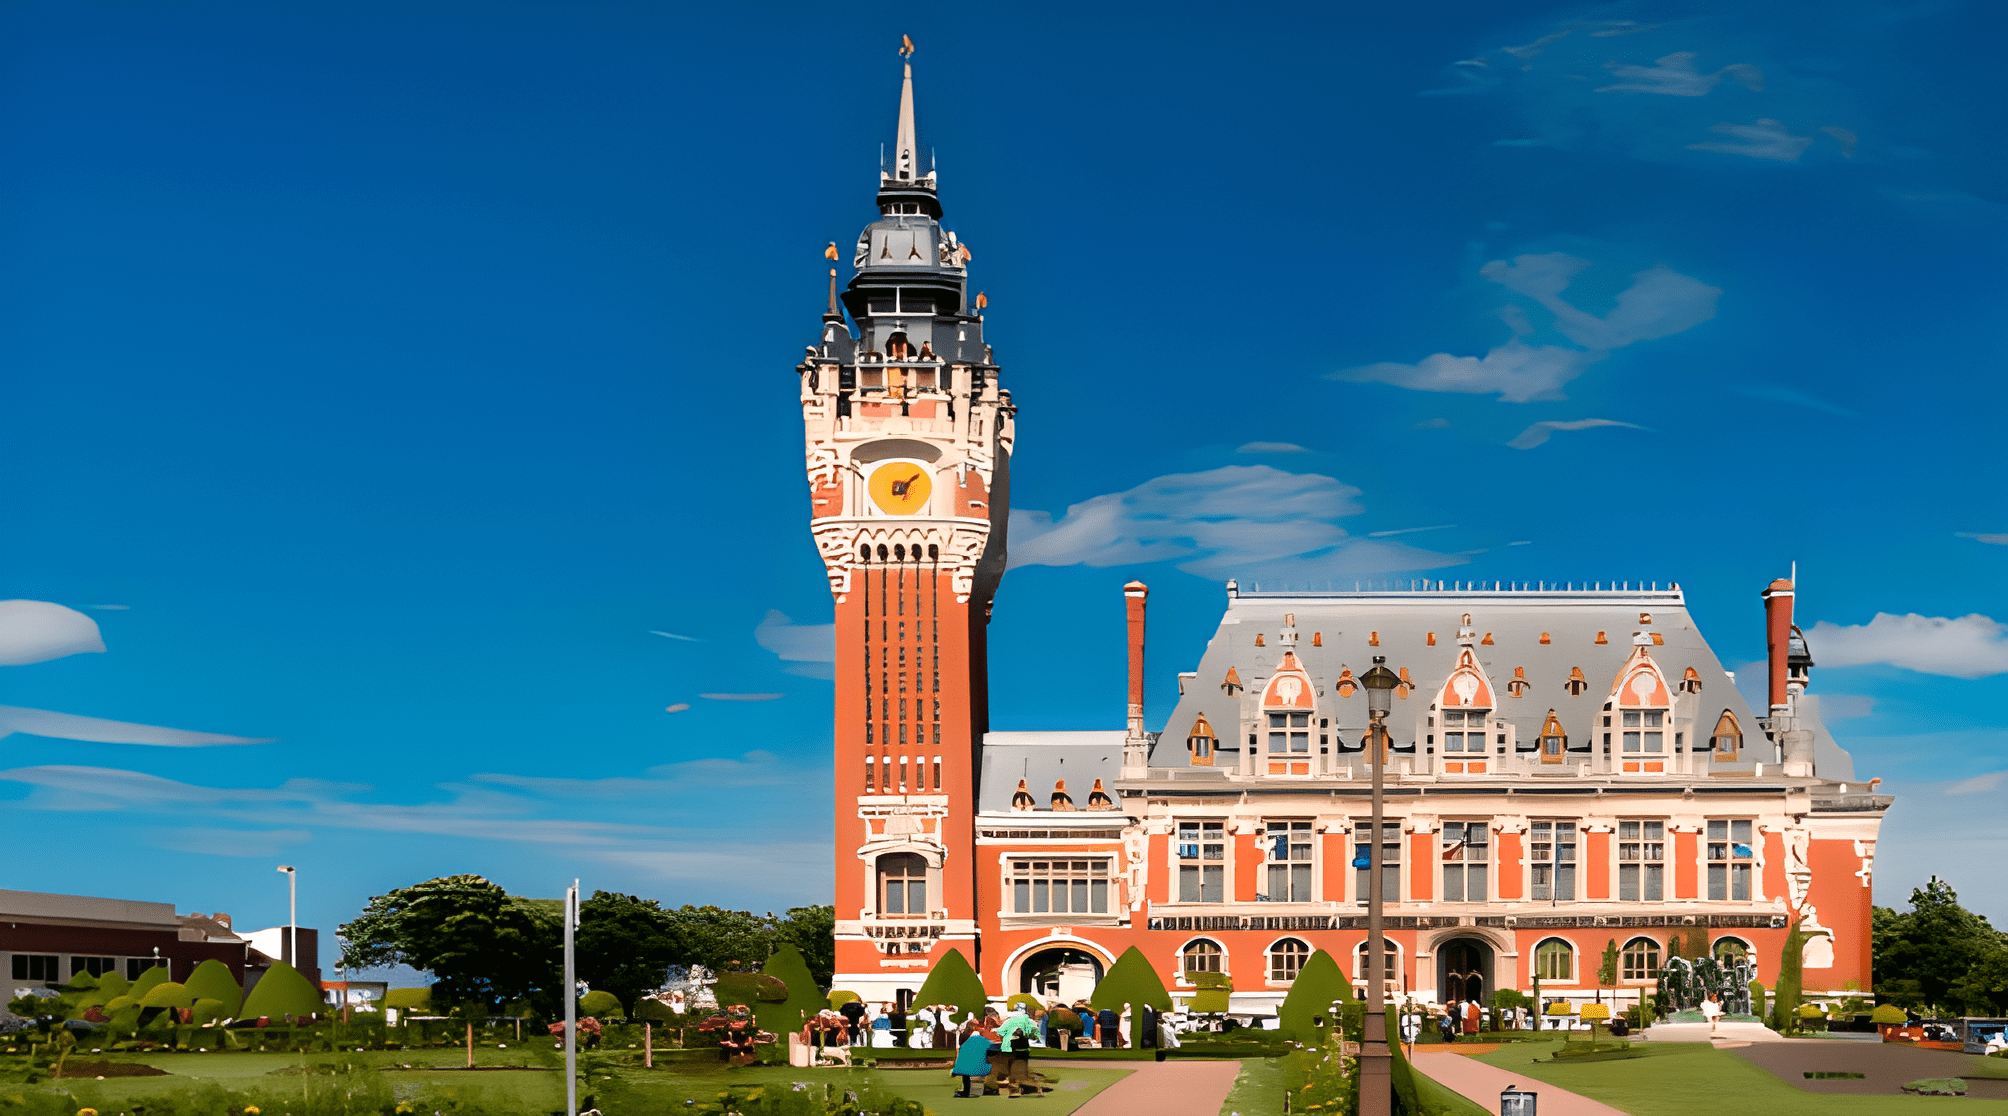 Calais - A Travel Guide and Best Things to do in Calais